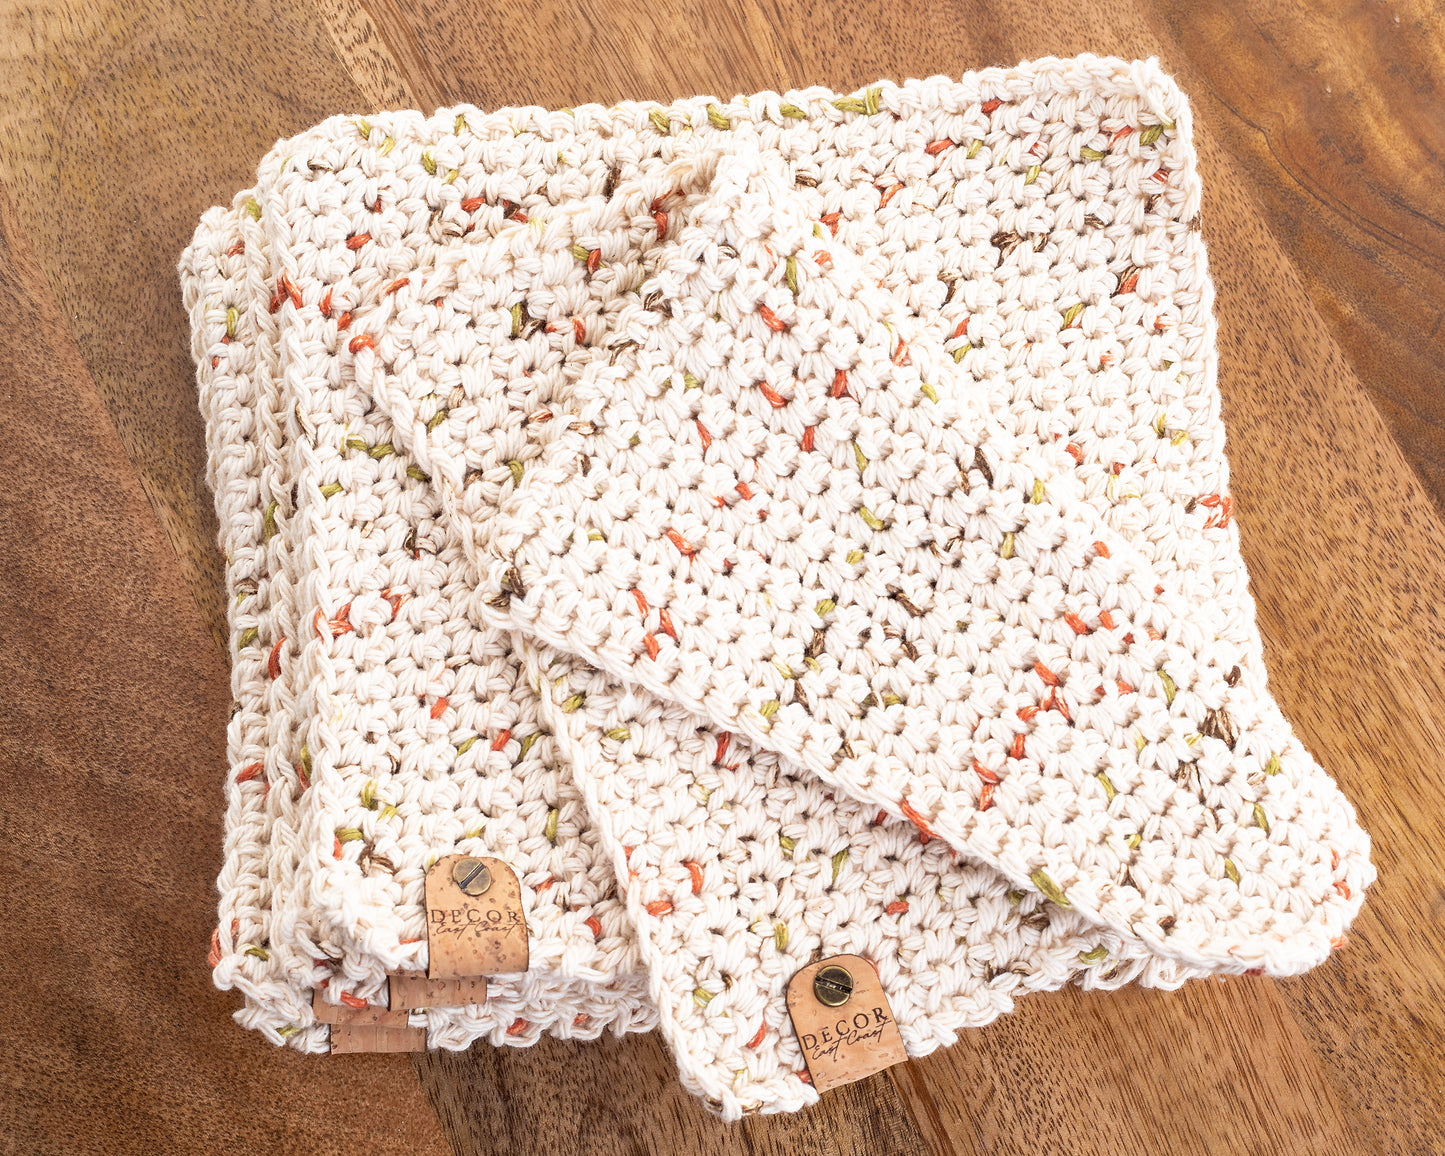 Dishcloth - sold in pairs of 2